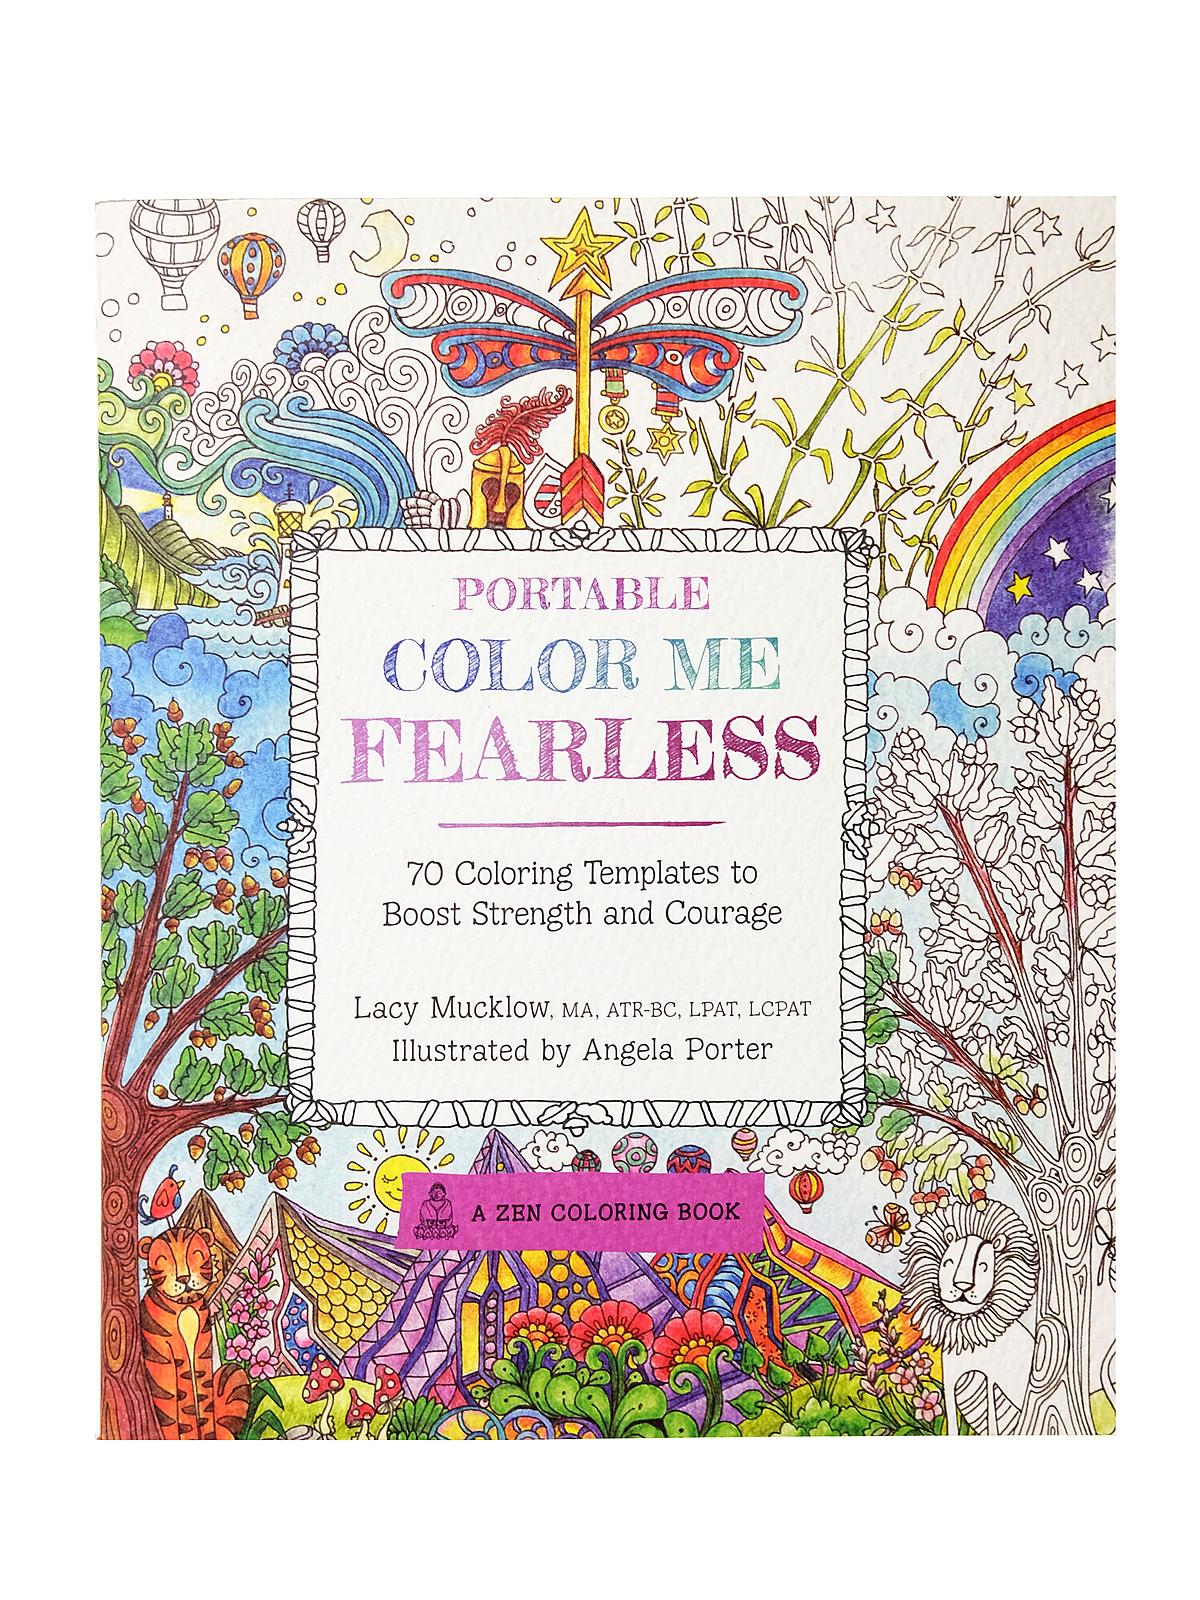 Portable Color Me Series Fearless